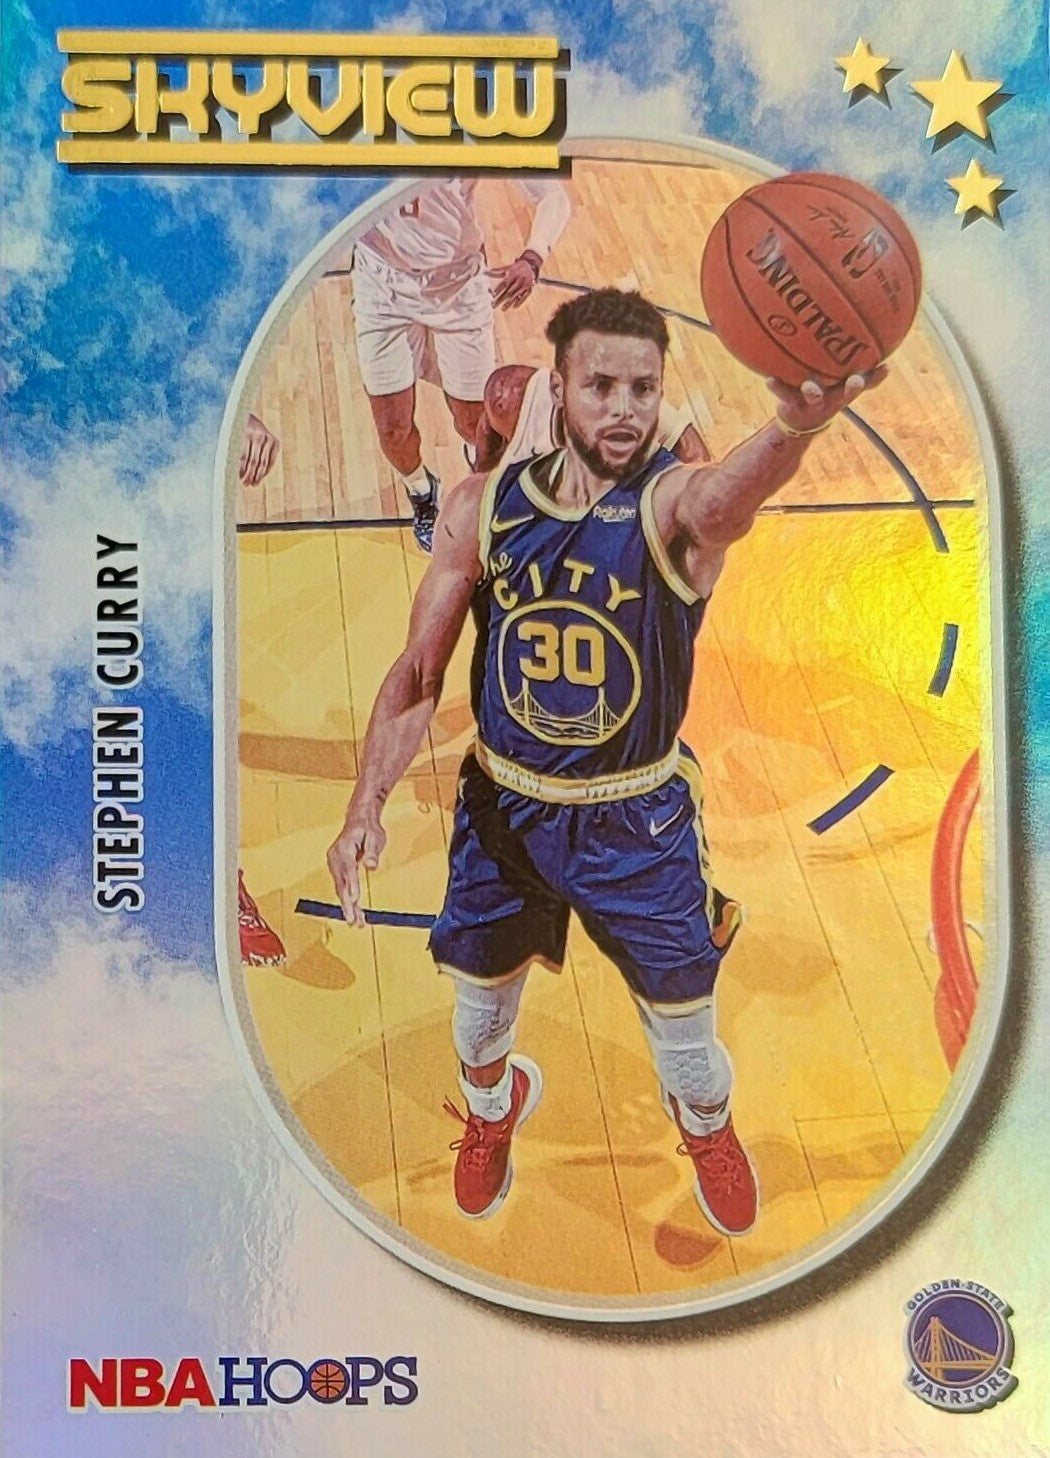 stephen curry 2021 jersey